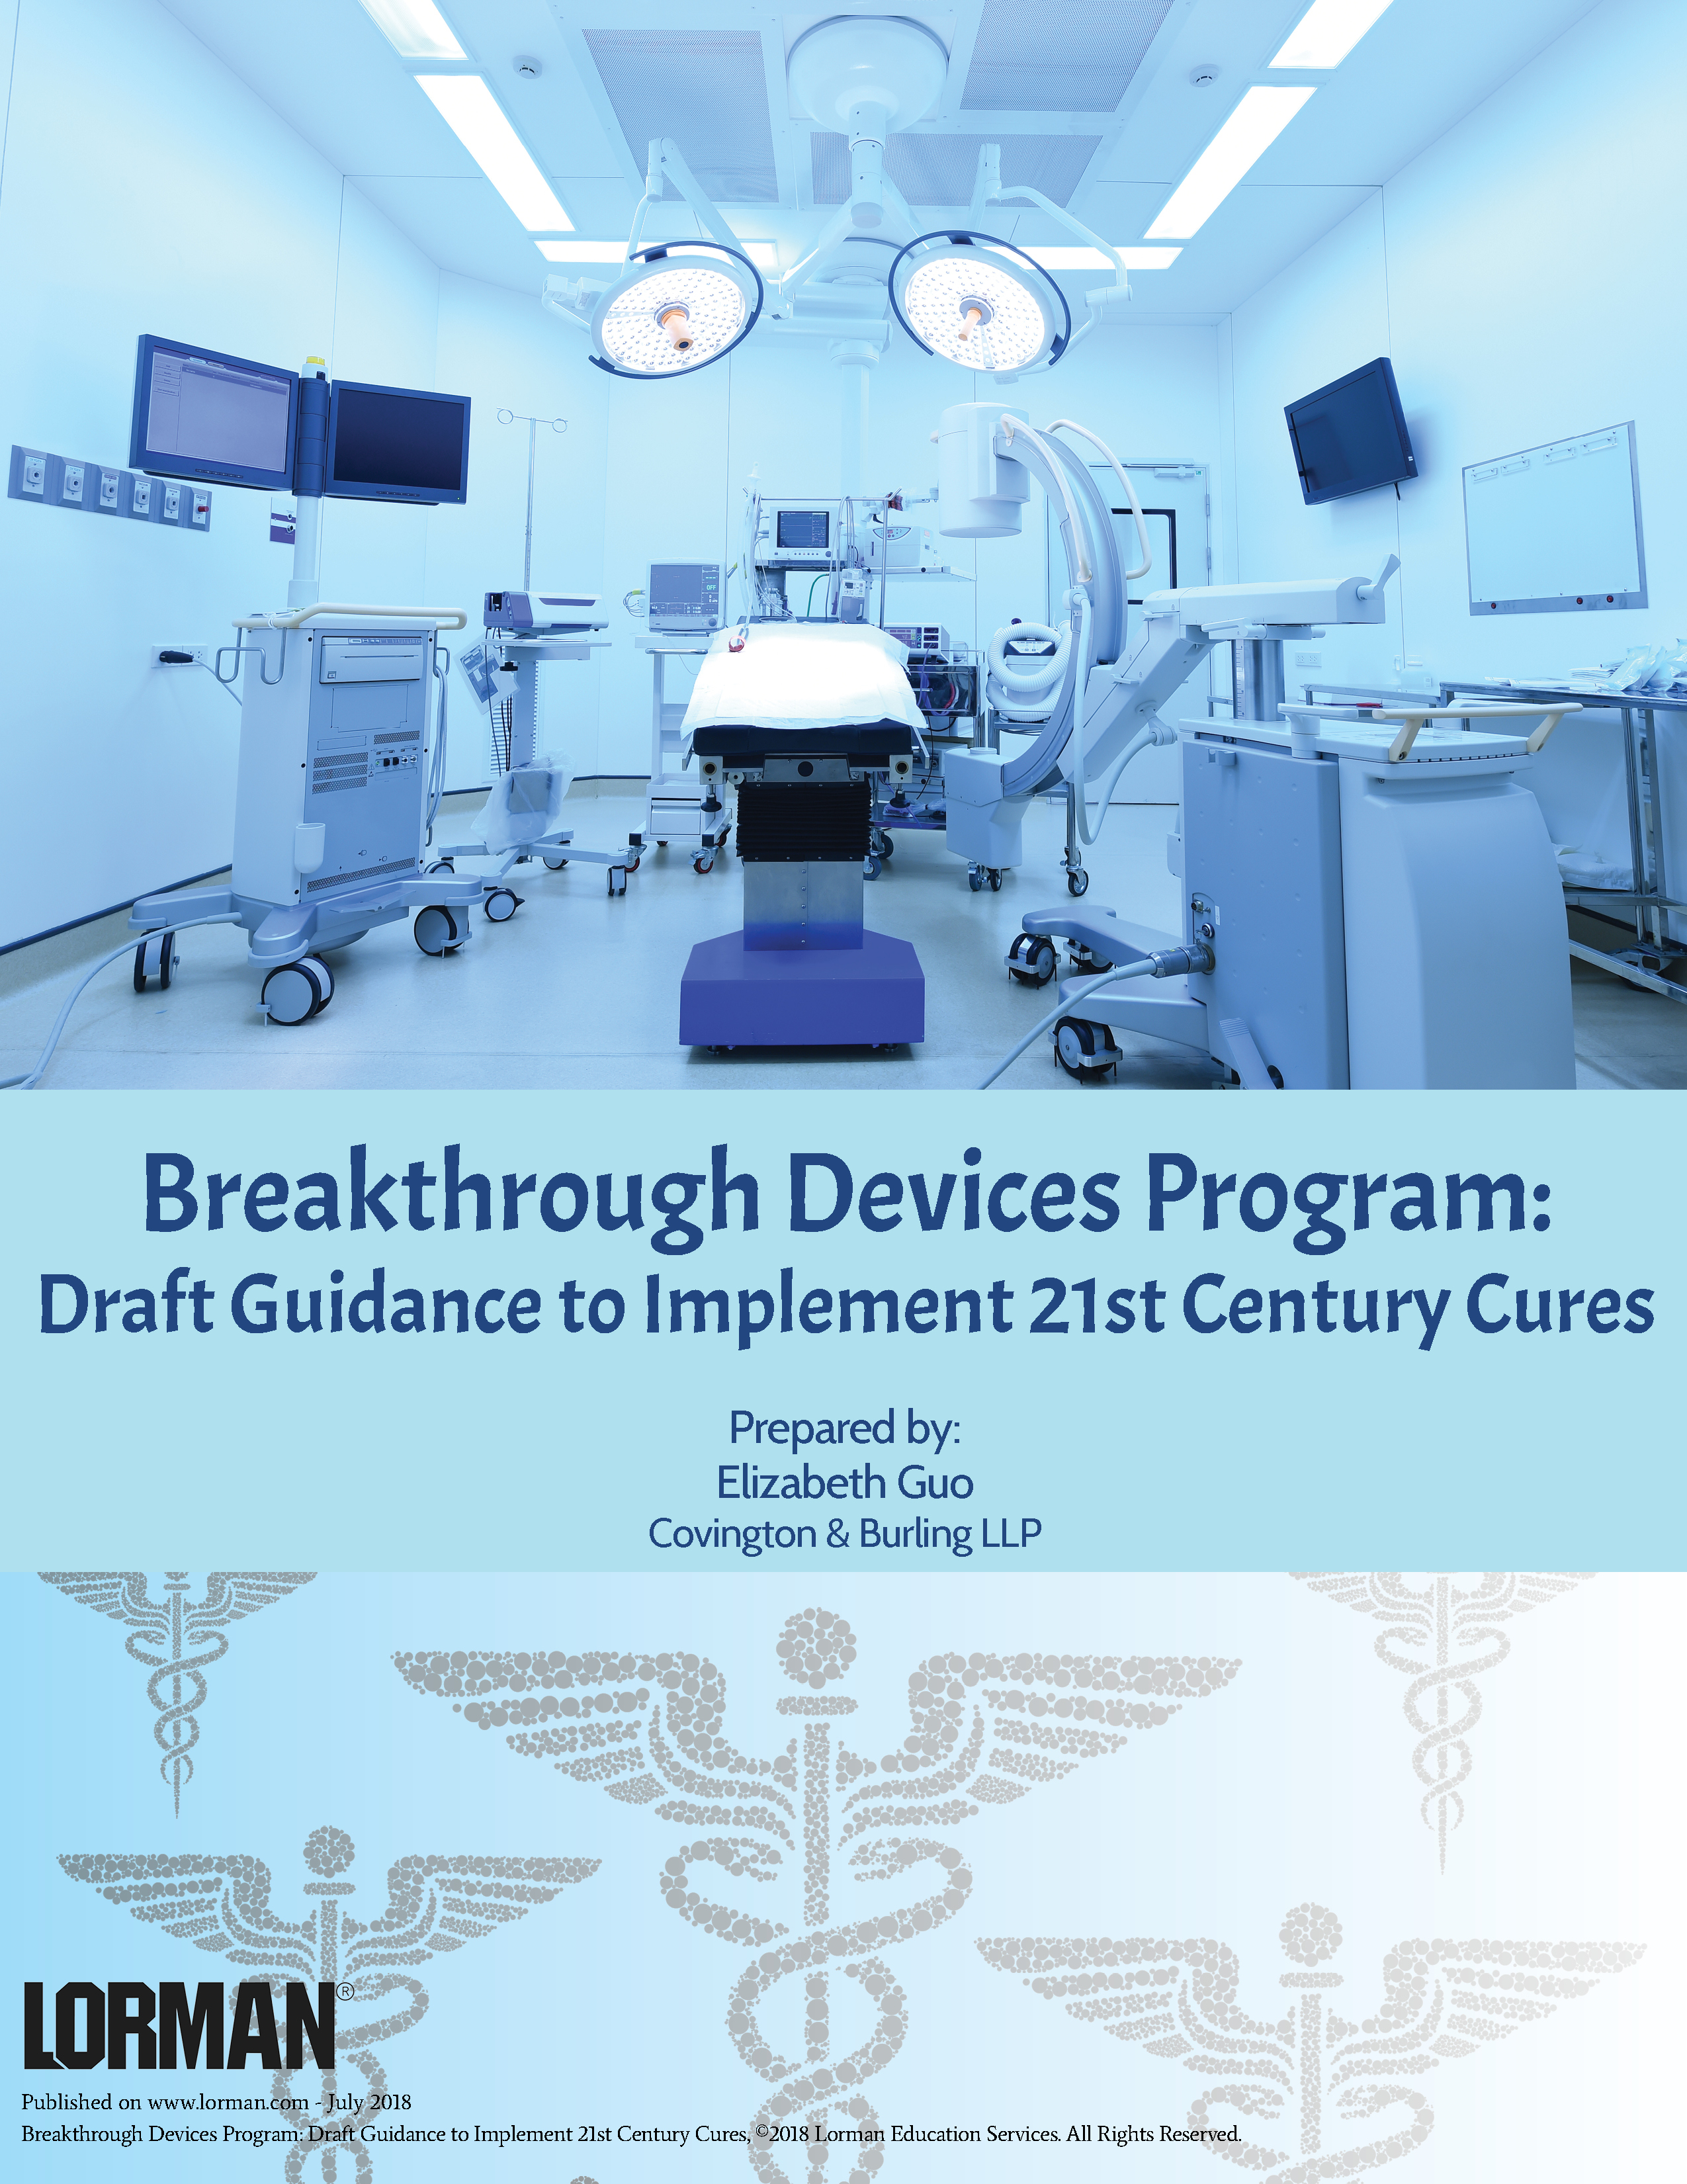 Breakthrough Devices Program: Draft Guidance to Implement 21st Century Cures